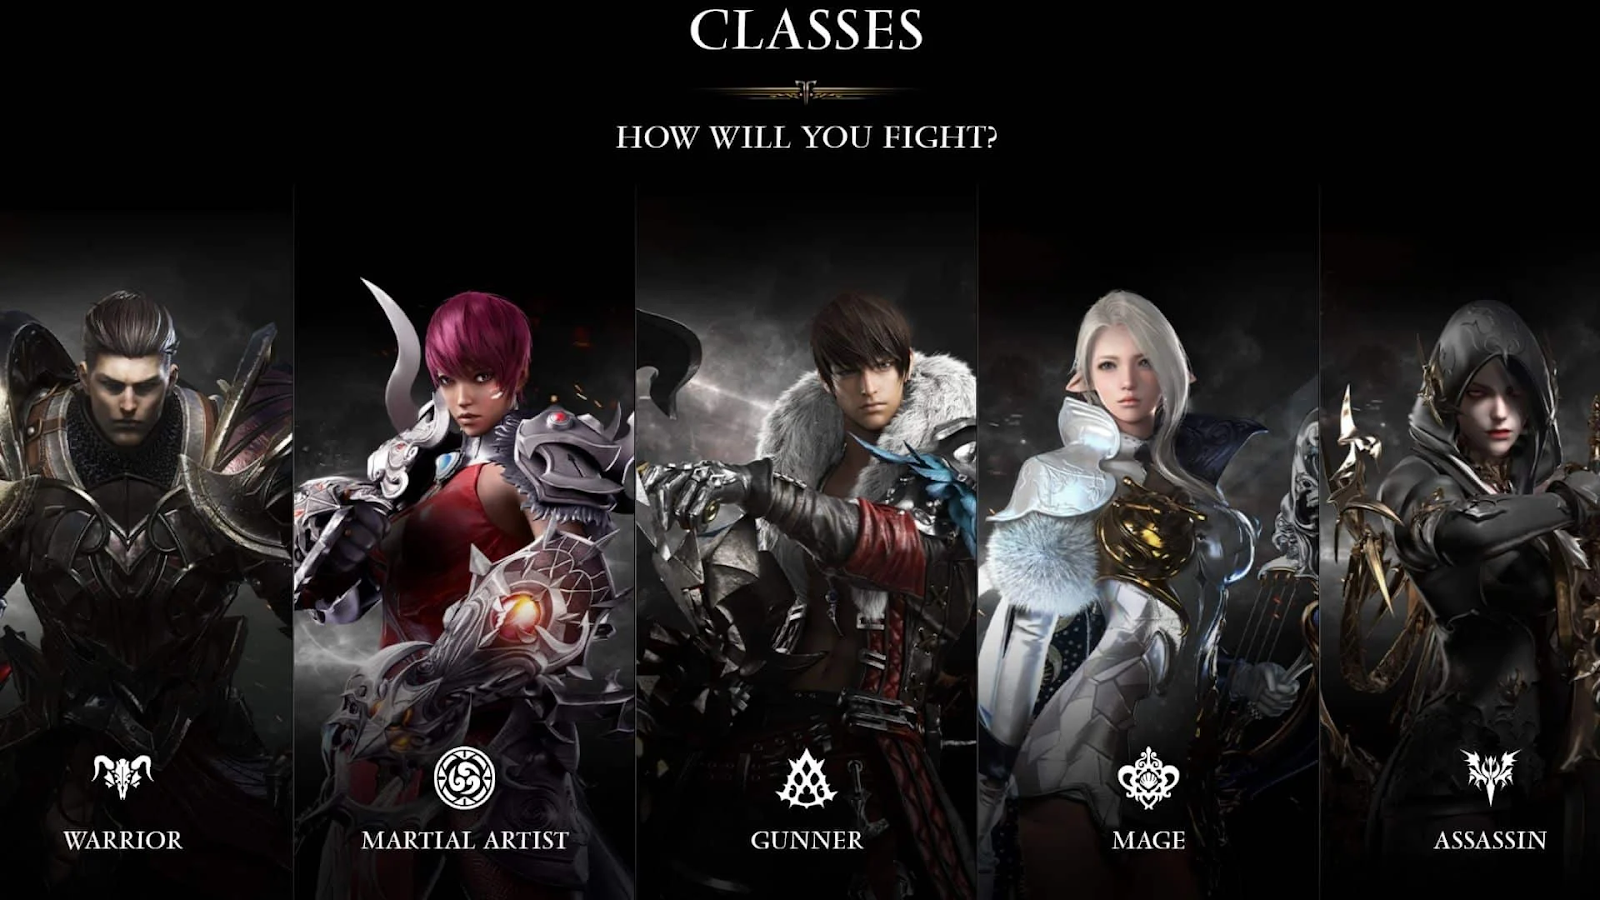 Choose your new favorite Class from this Lost Ark classes guide!